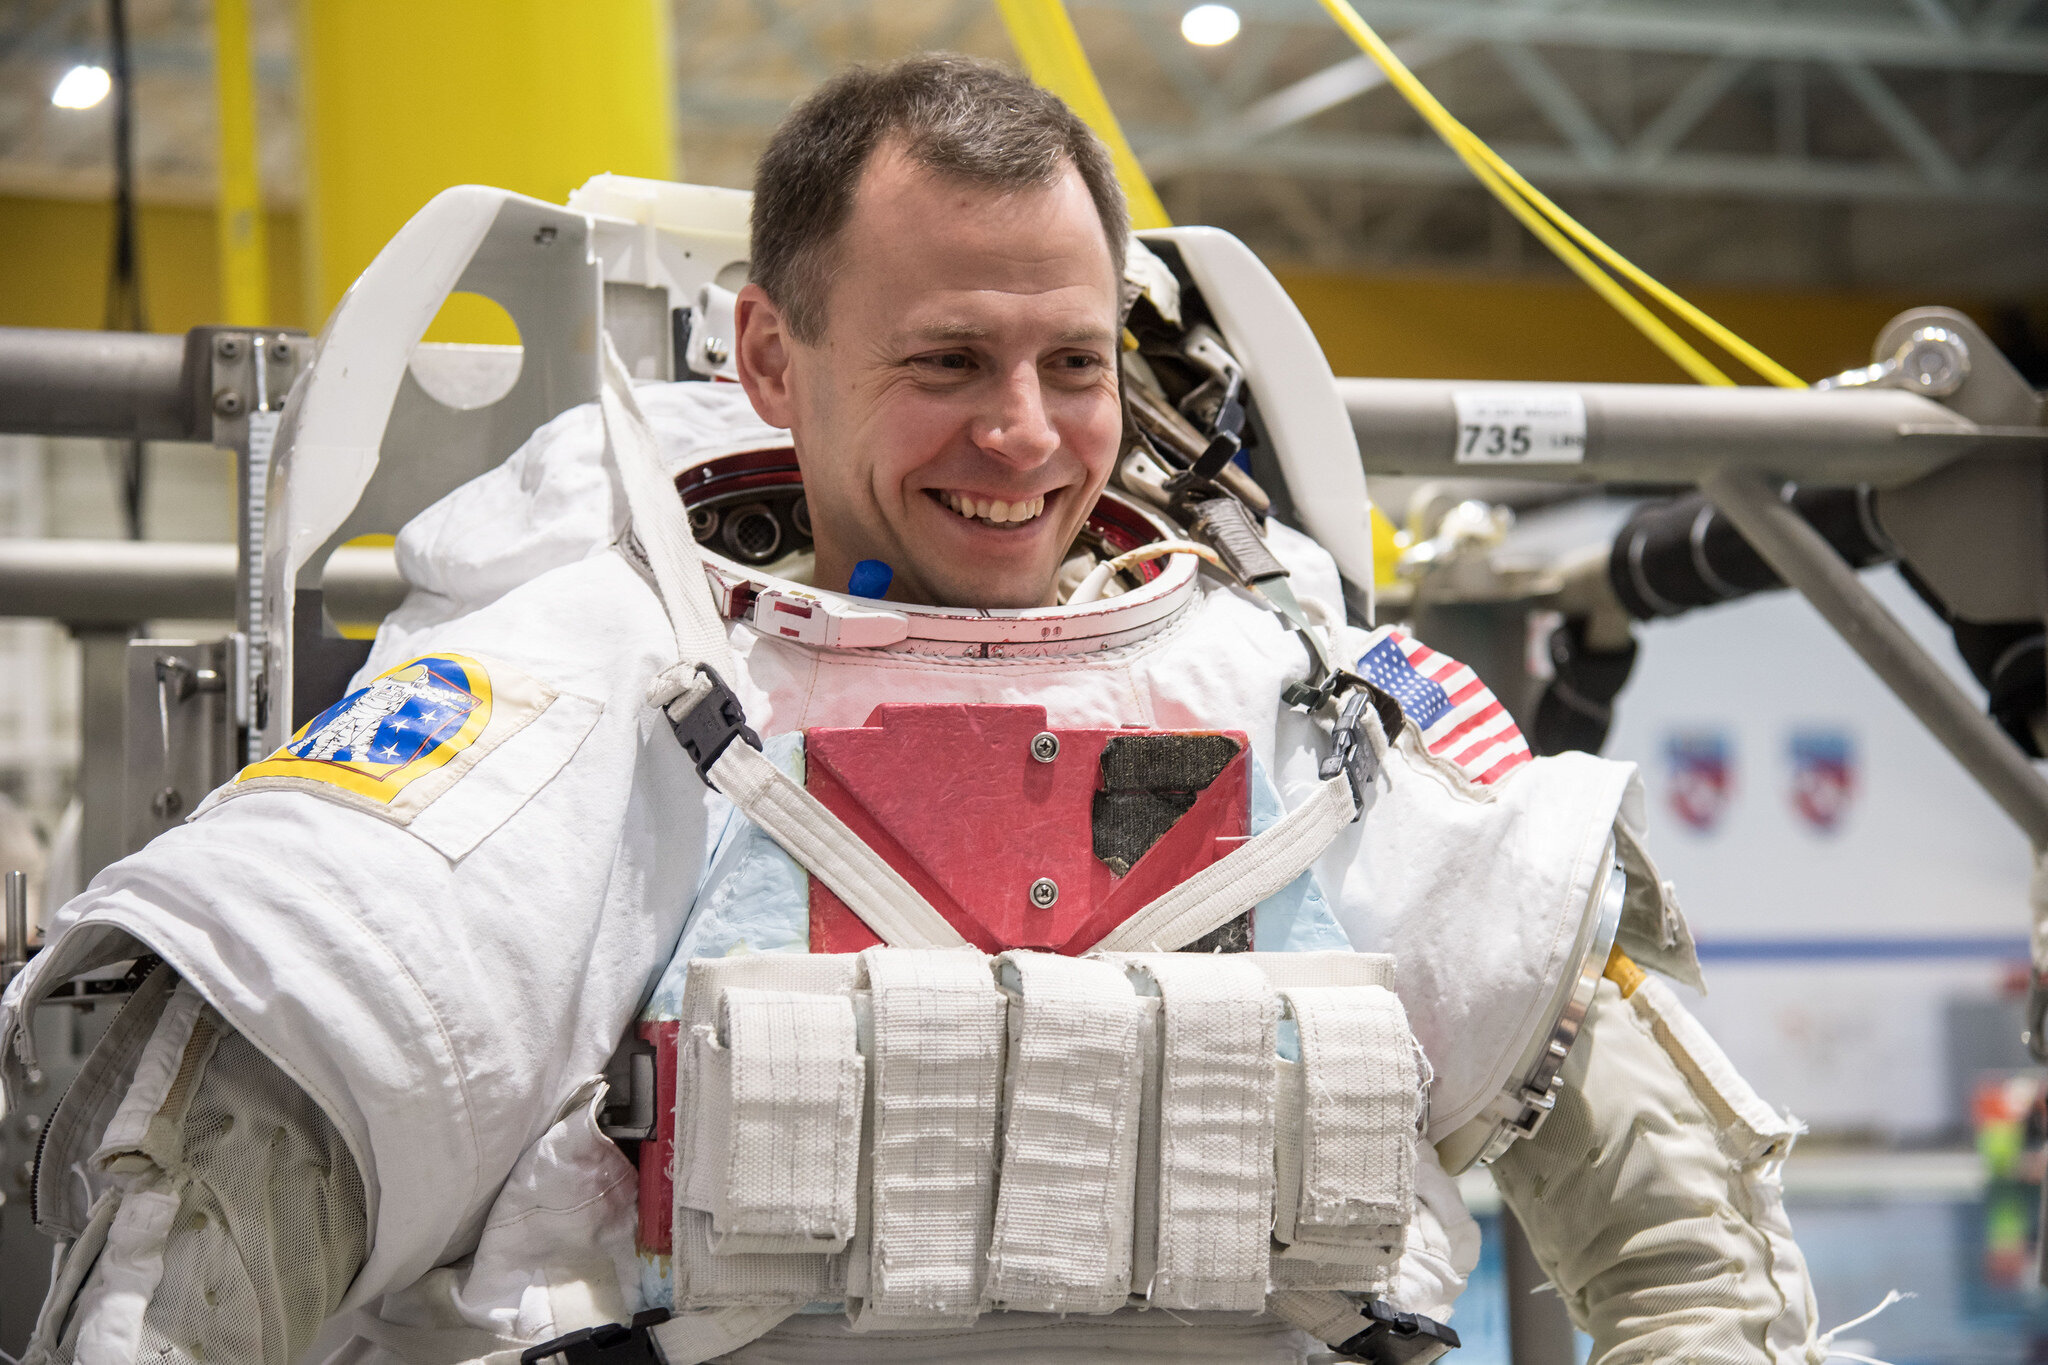 NASA astronaut Nick Hague smiles in his space suit during spacewalk training at NASA’s Neutral Buoyancy Laboratory.